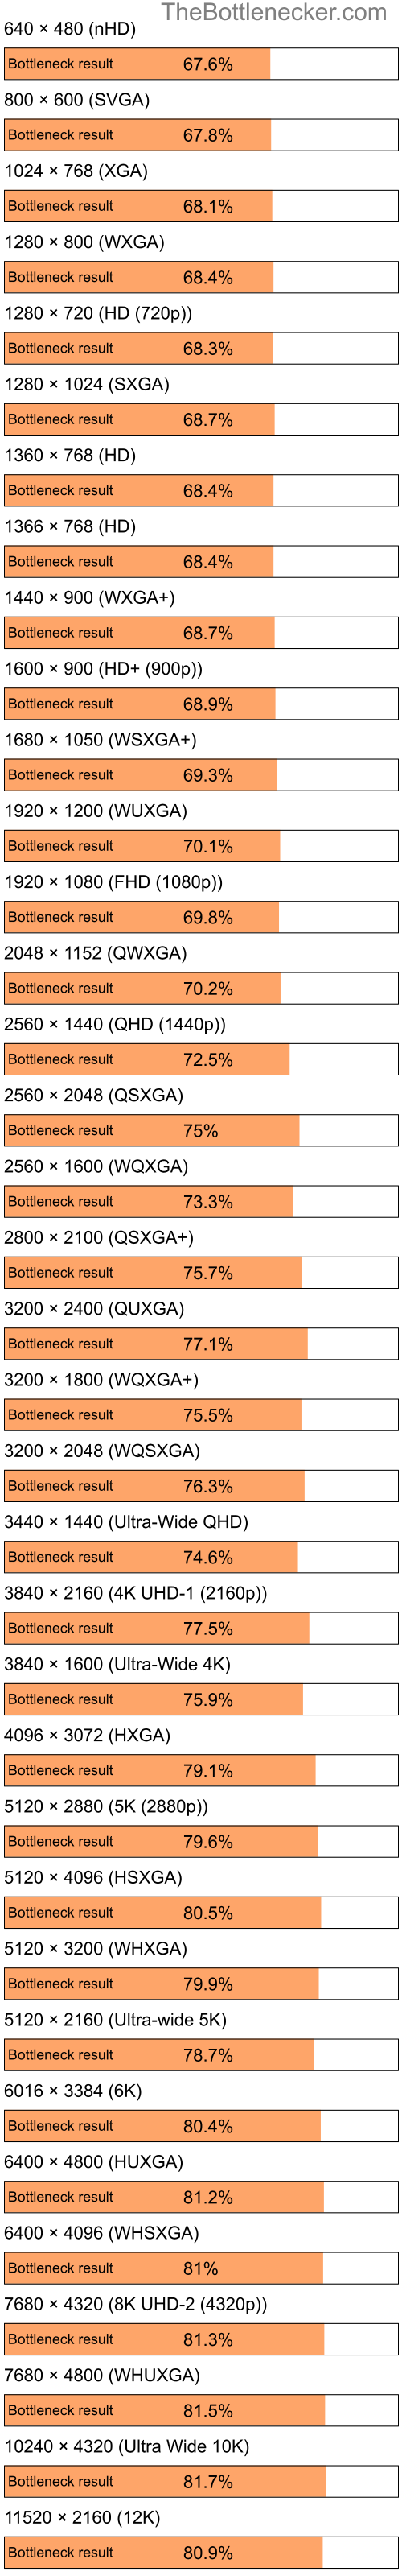 Bottleneck results by resolution for Intel Pentium 4 and AMD Radeon X1300 in General Tasks